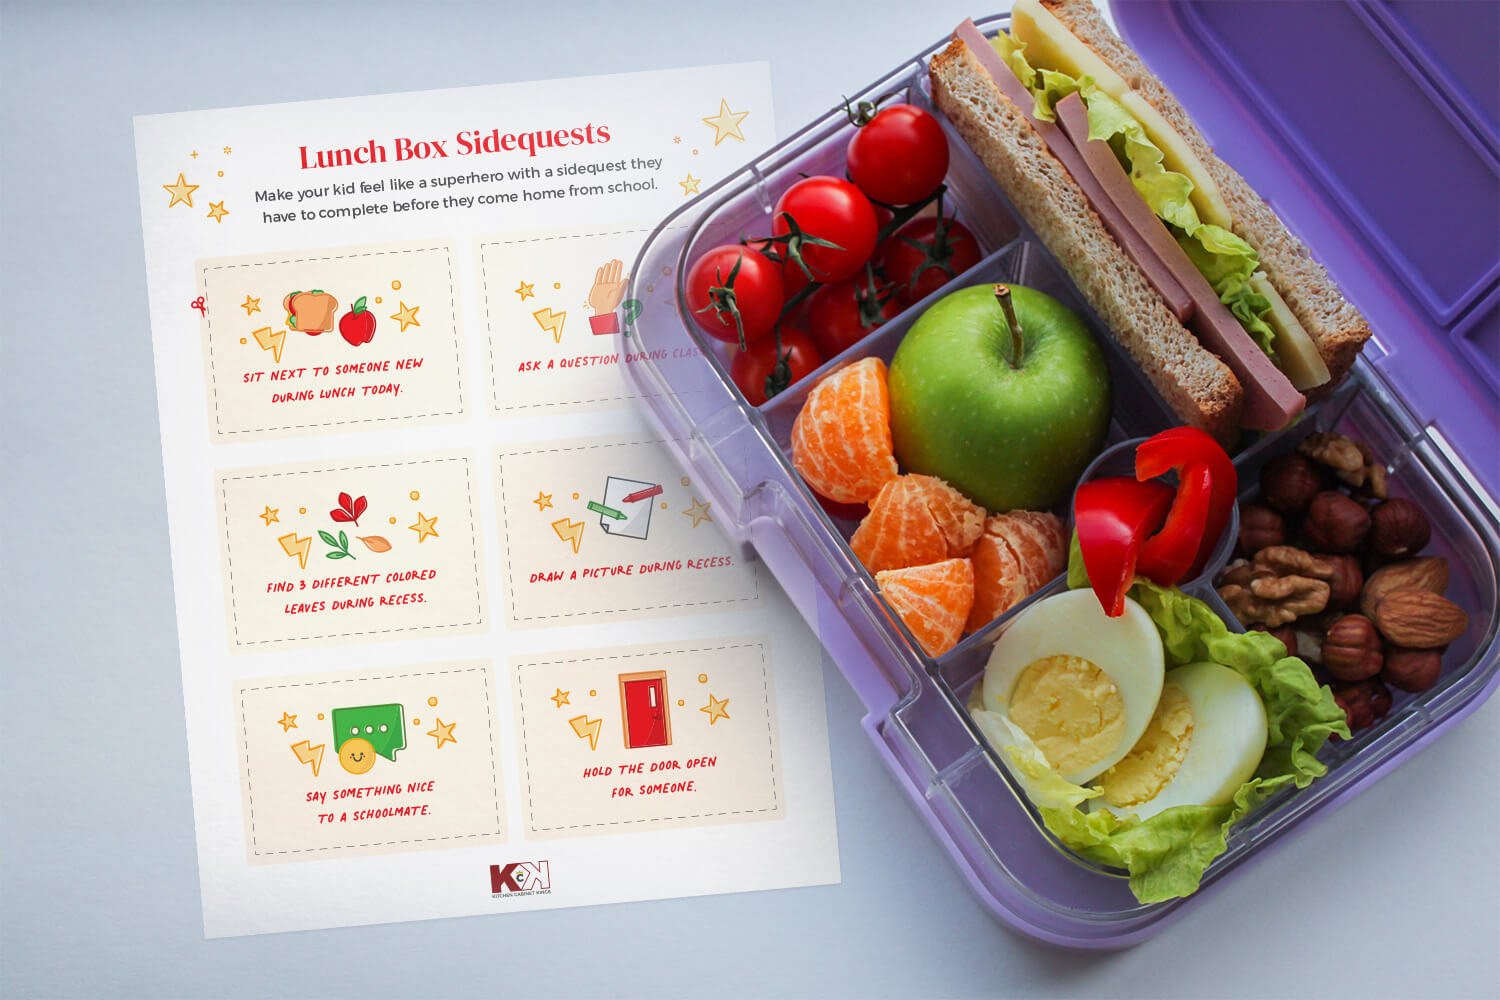 Printable lunch box sidequests next to a blue lunch box filled with eggs, fruits, veggies, nuts, and a sandwich.